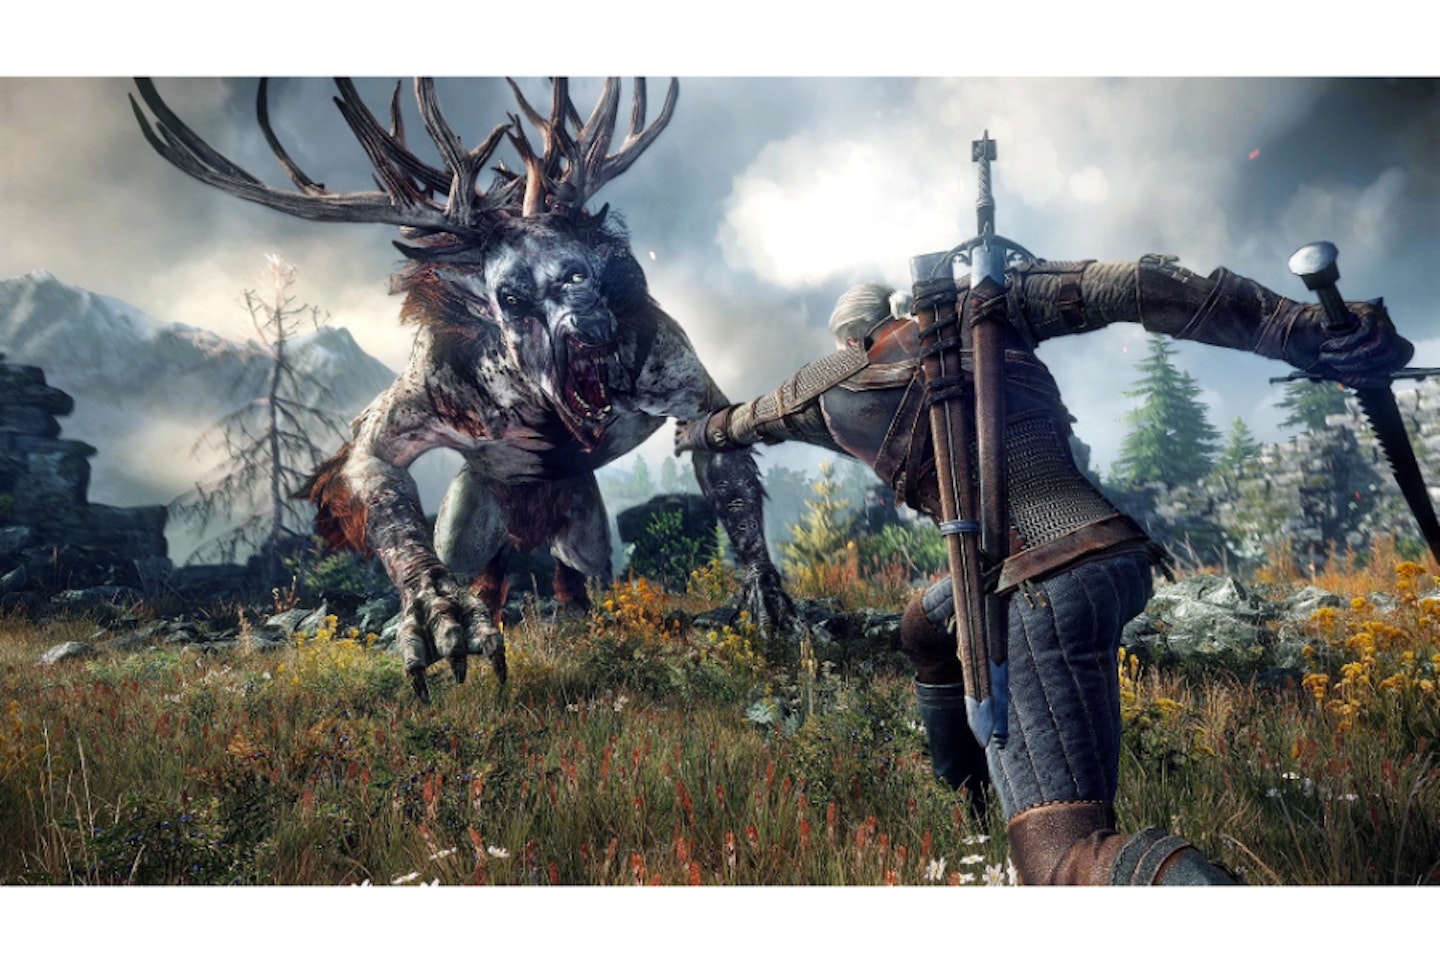 The Witcher 3 Game of the Year Edition